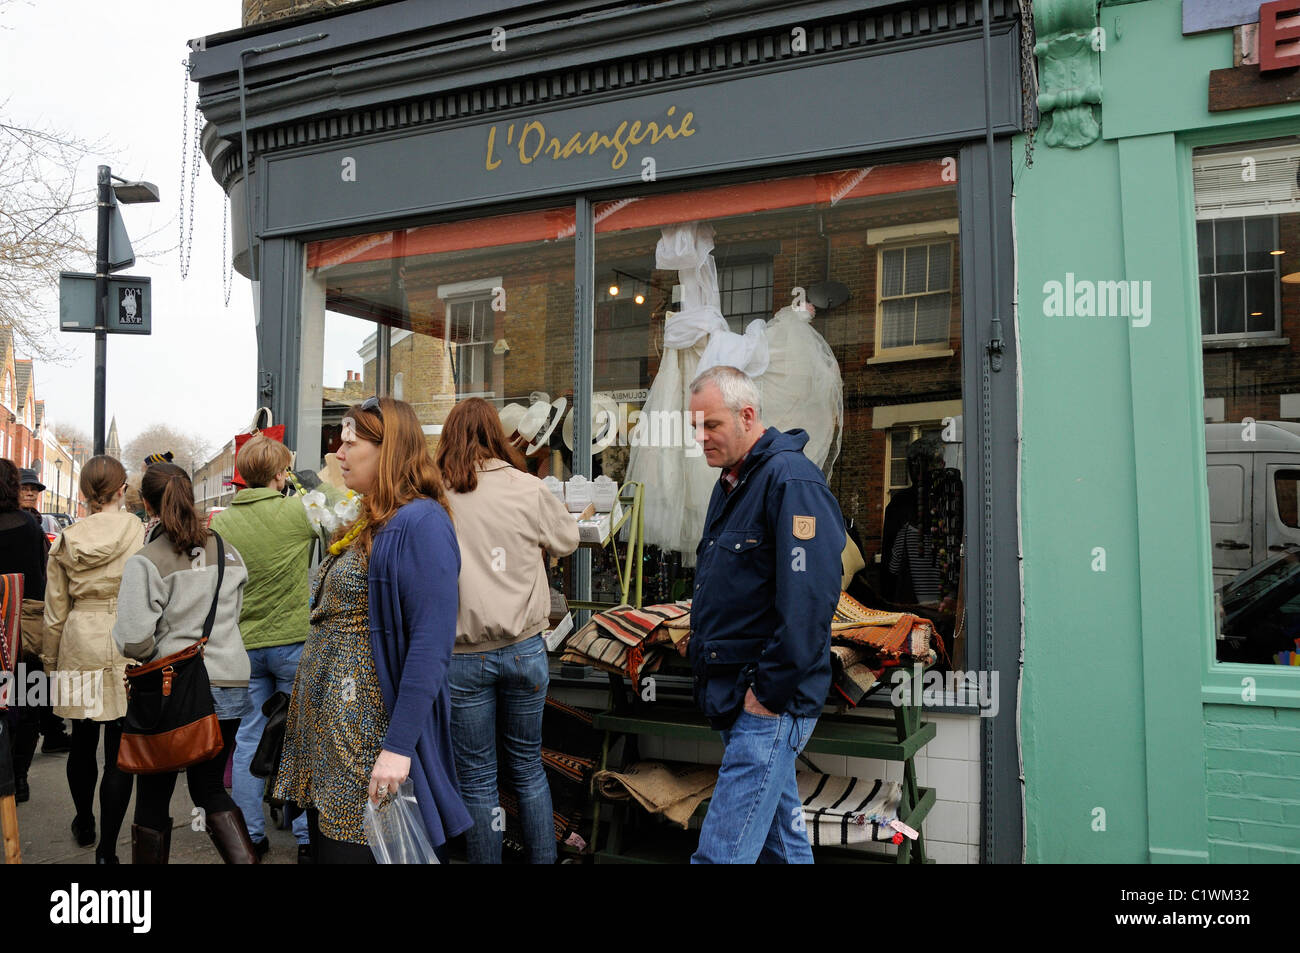 People in front of L'Orangerie shop in a busy Columbia Road Flower Market Tower Hamlets East London England UK Stock Photo